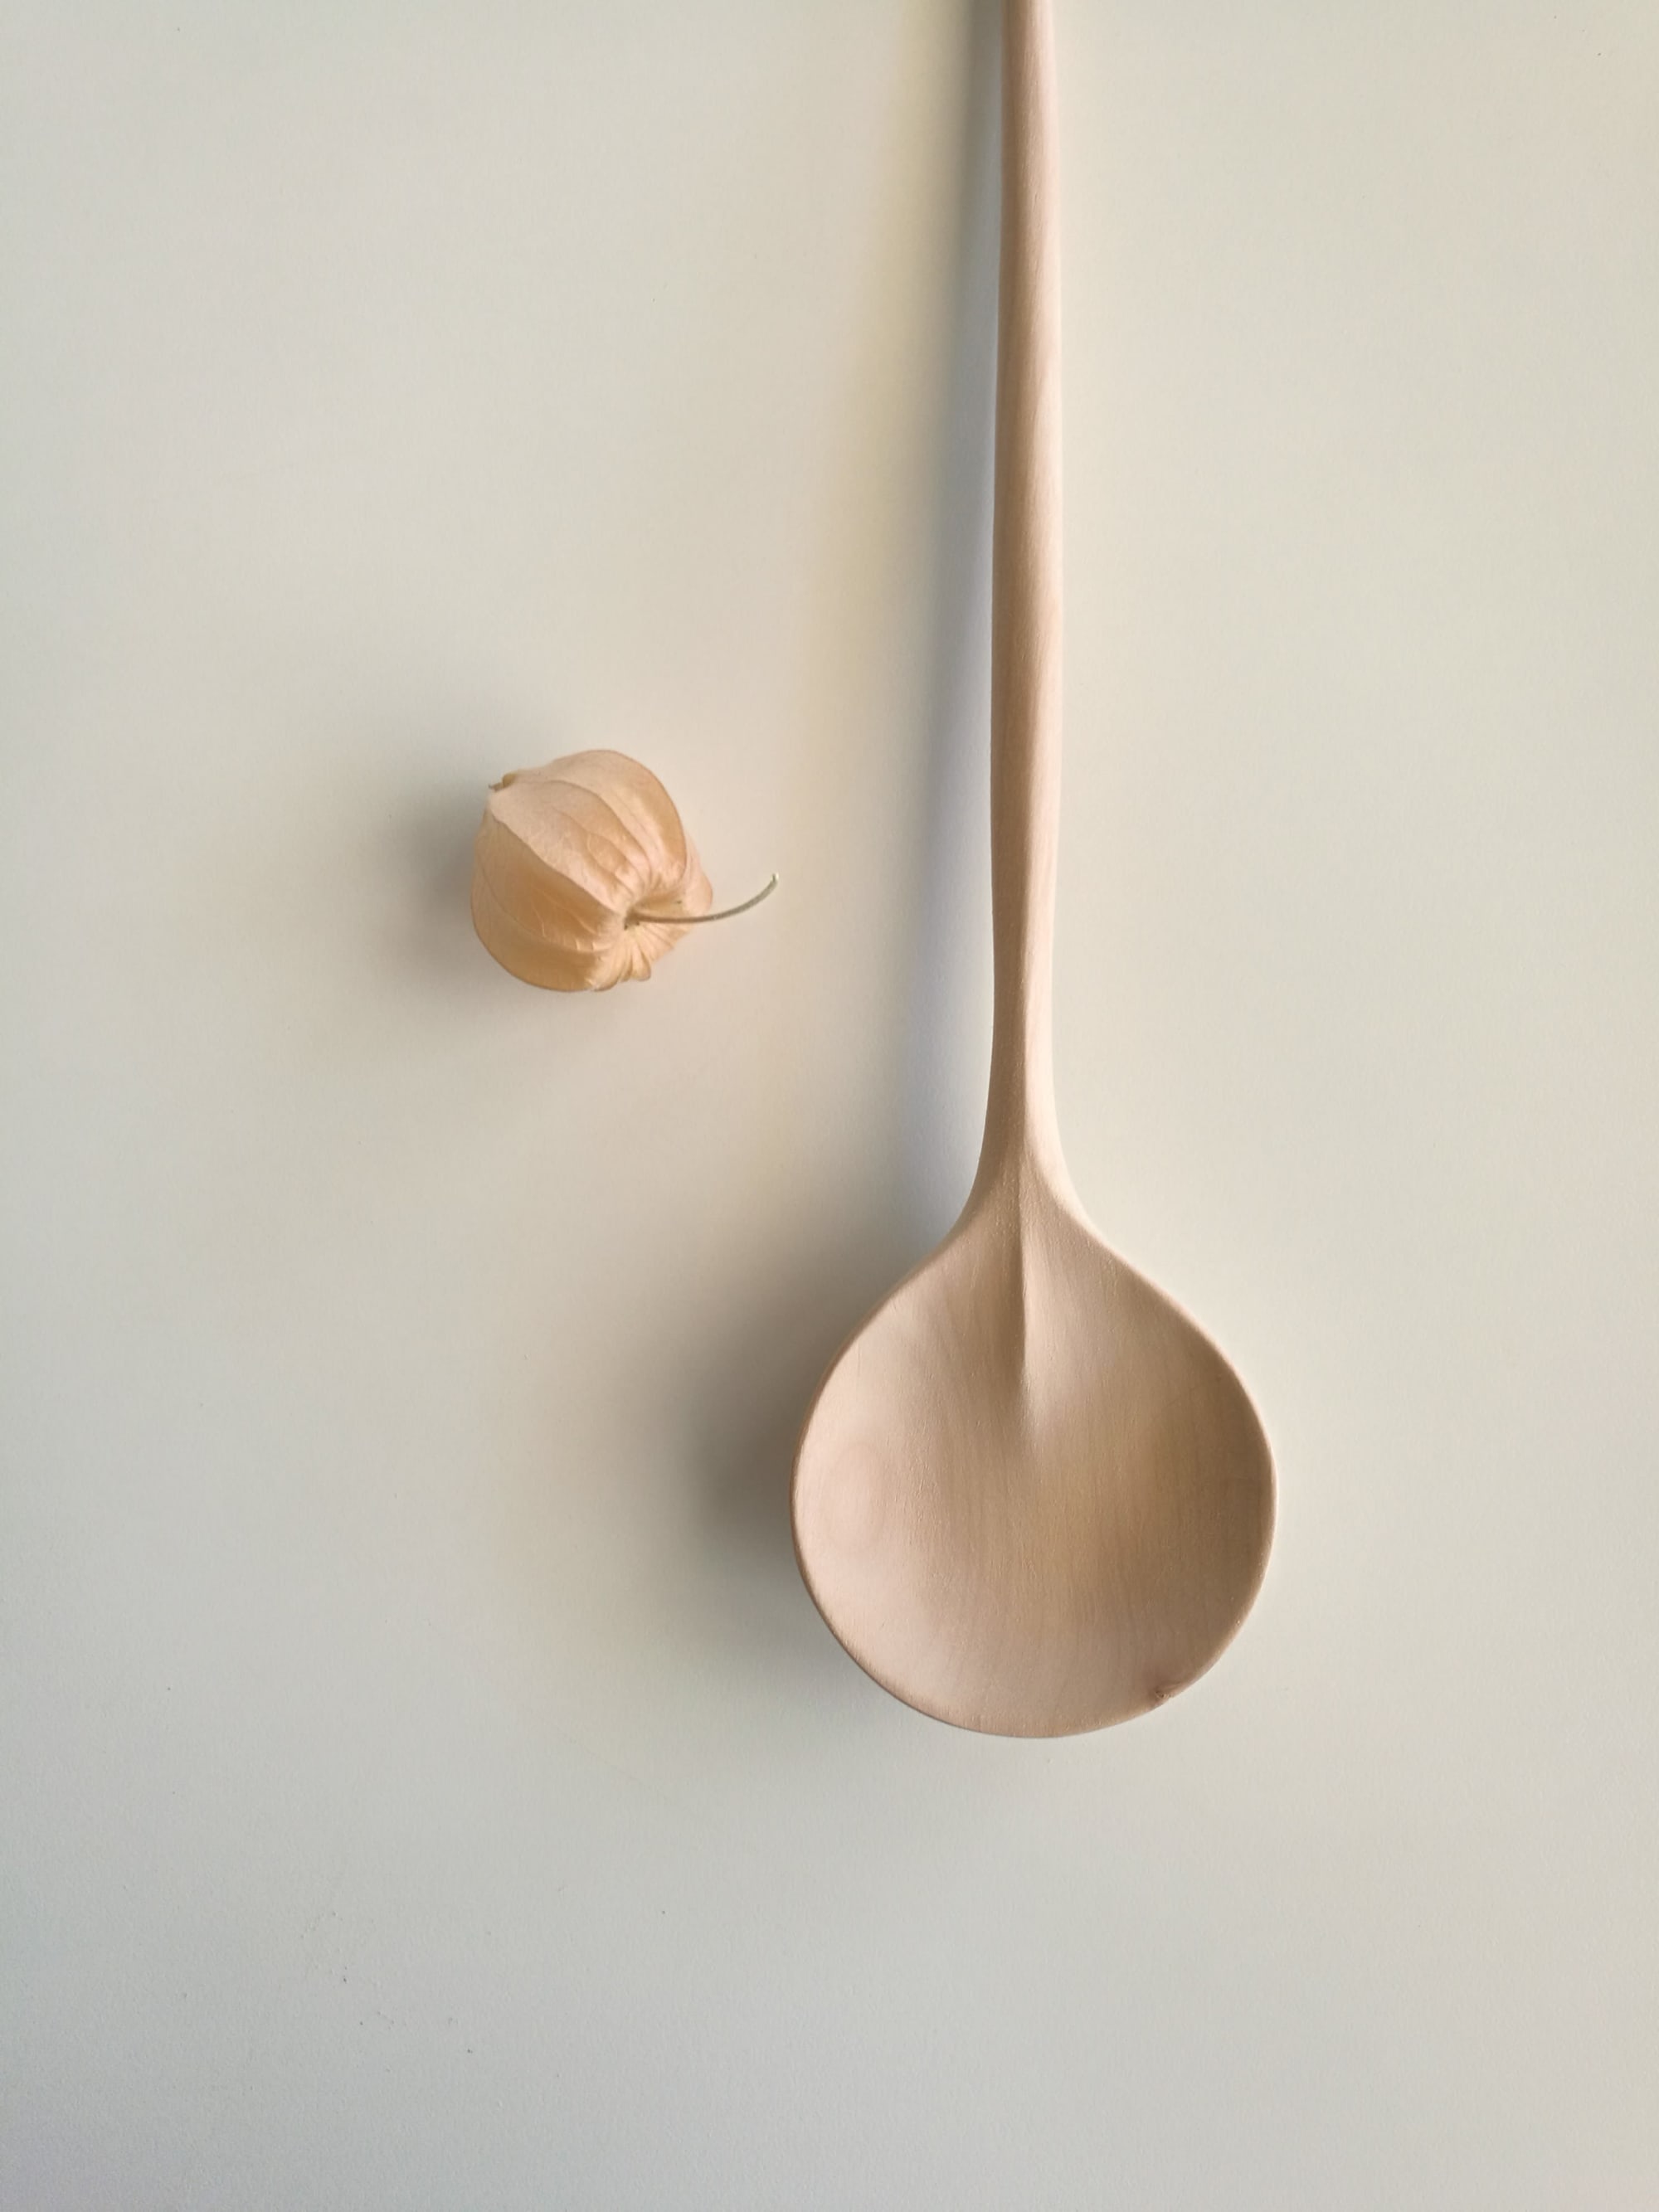 Wooden Serving Spoon with Center Spine